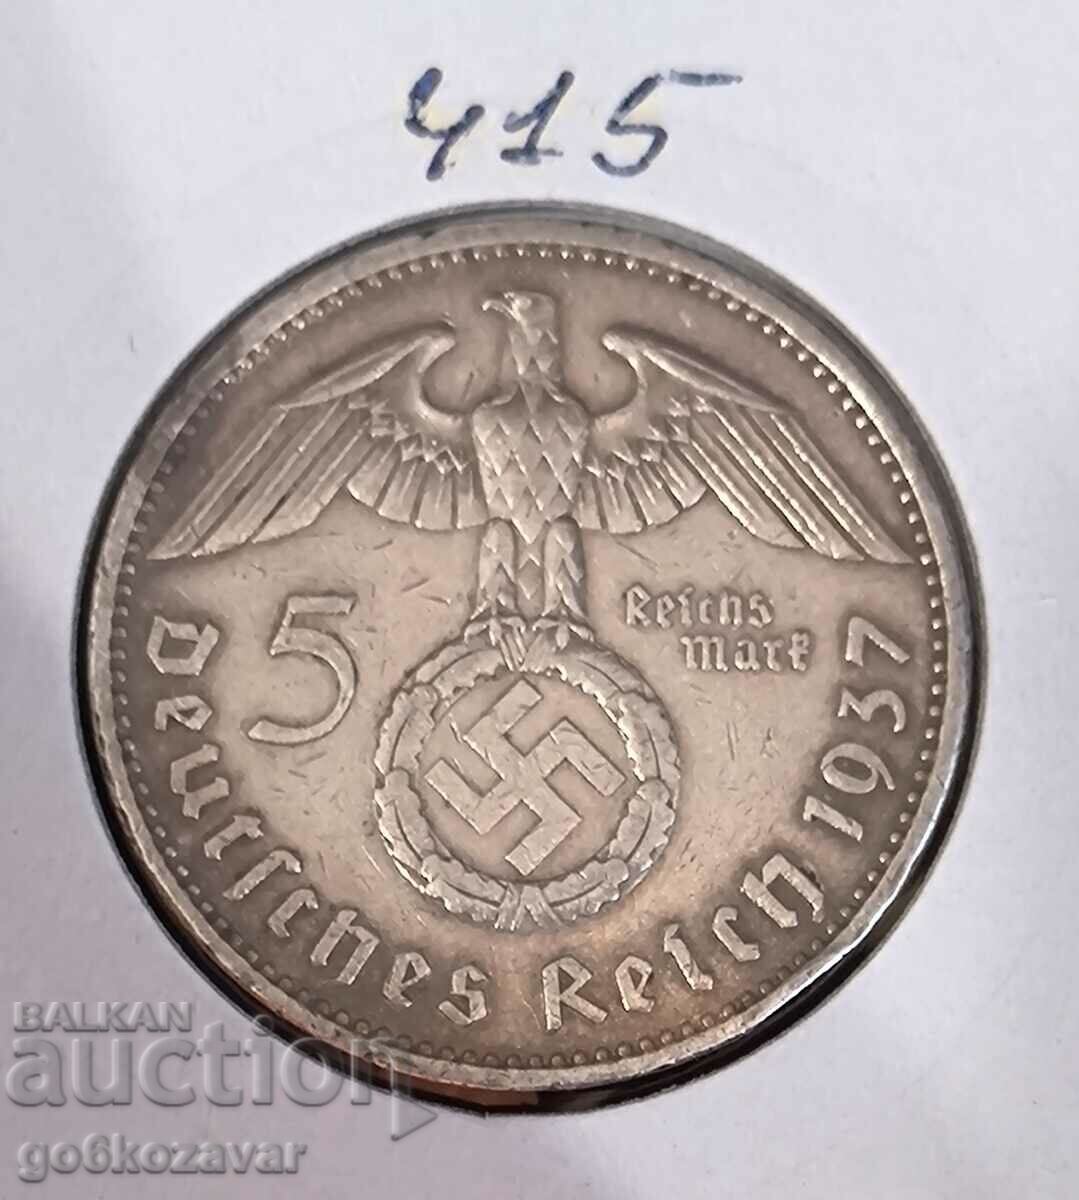 Germany Third Reich 5 stamps 1937 Silver!